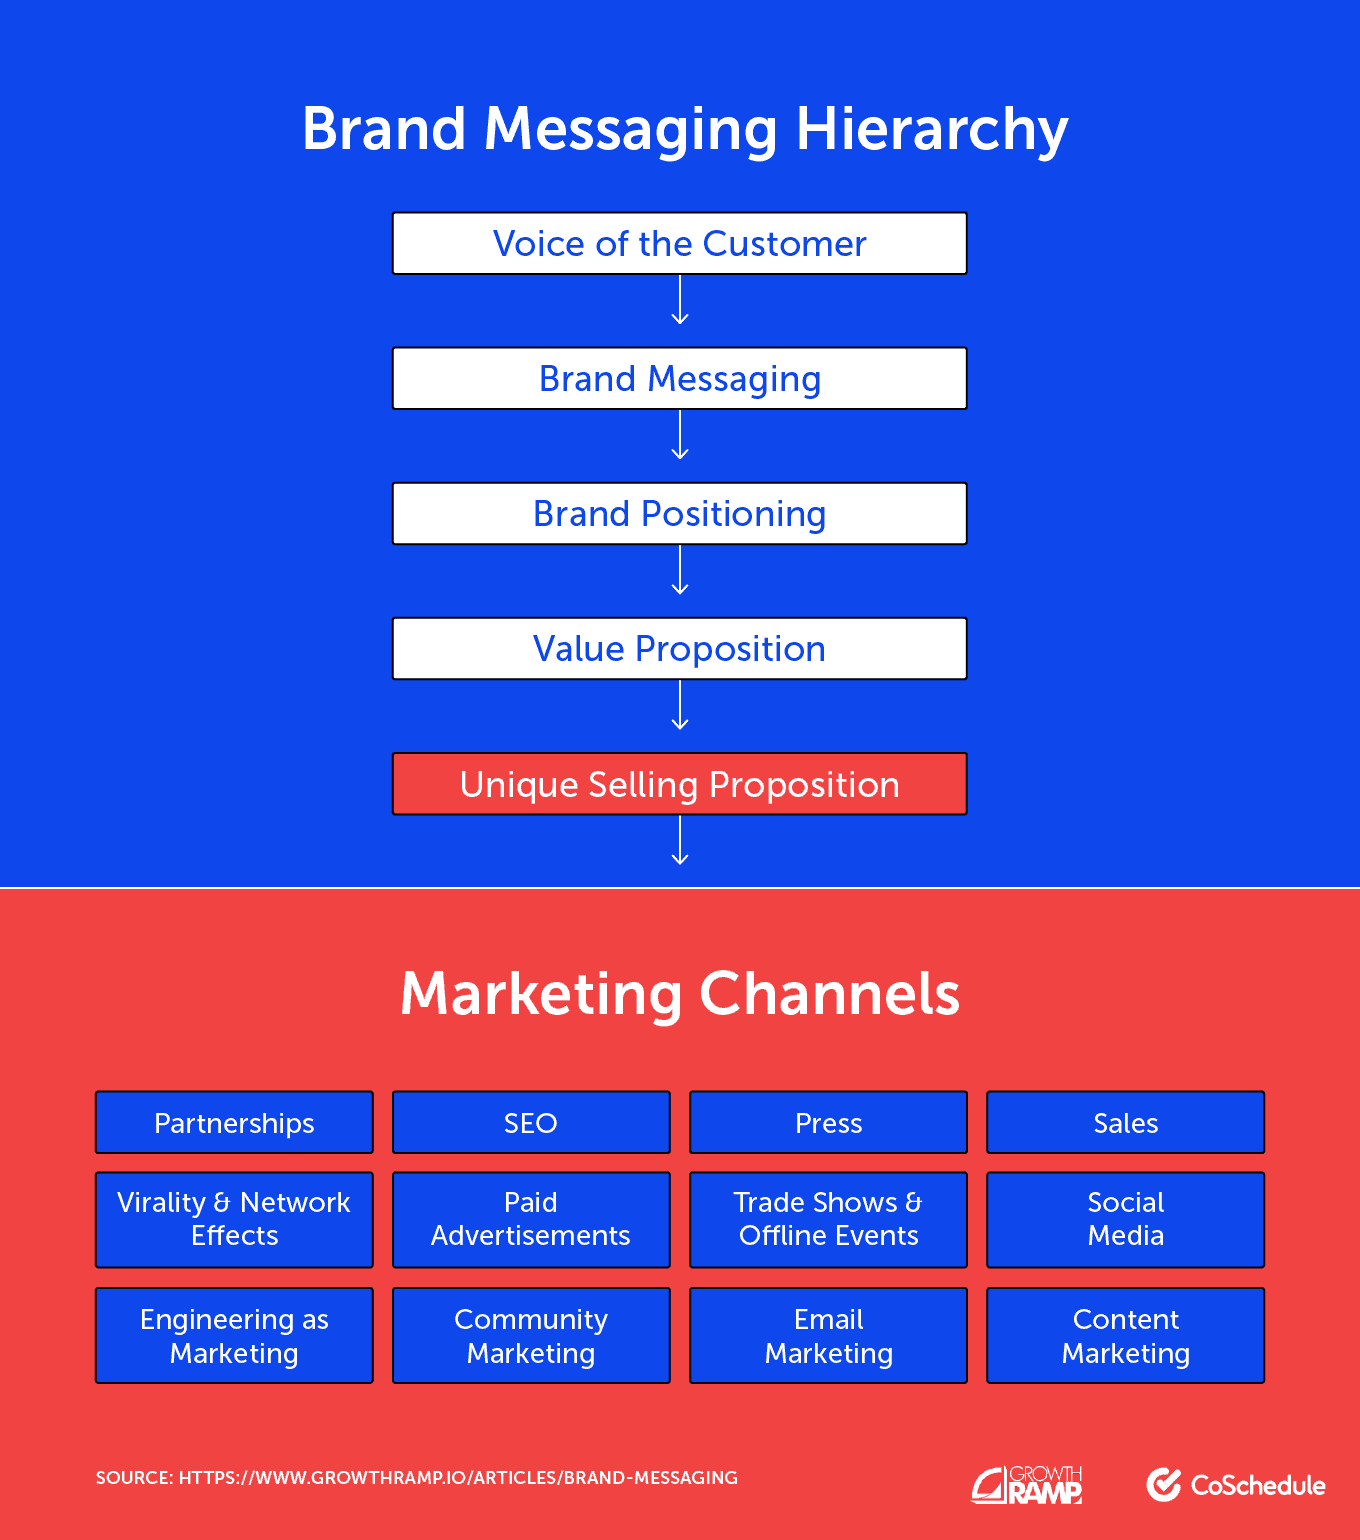 Visual of the brand messaging hierarchy and marketing channels